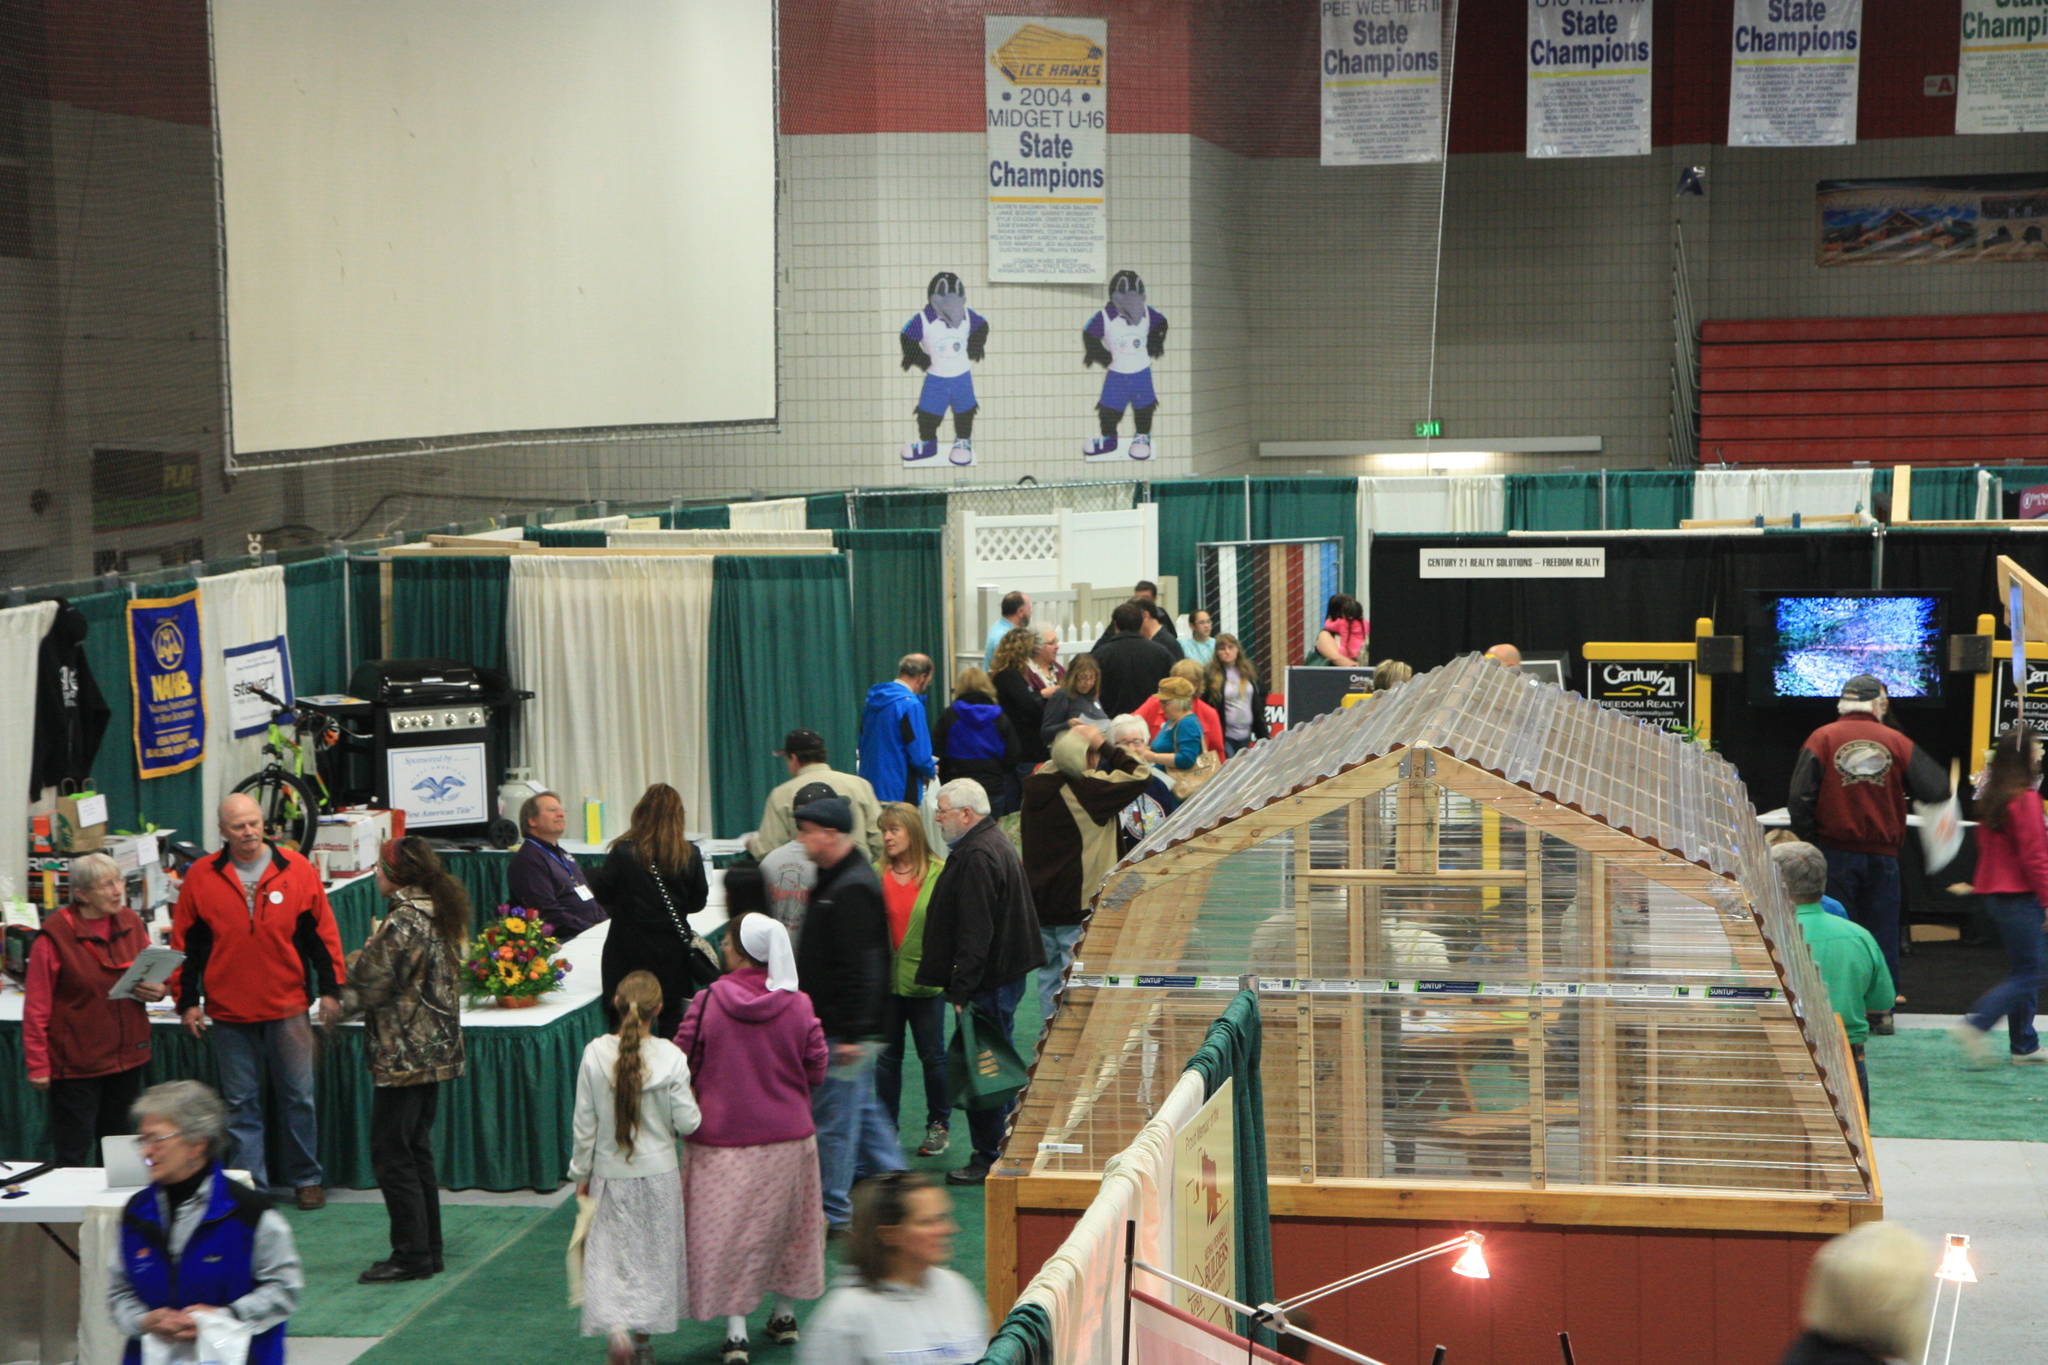 Peninsula residents attend the annual KPBA Home Show at the Soldotna Regional Sports Complex as seen here in this undated photo. (Courtesy of Kirsten Raye)